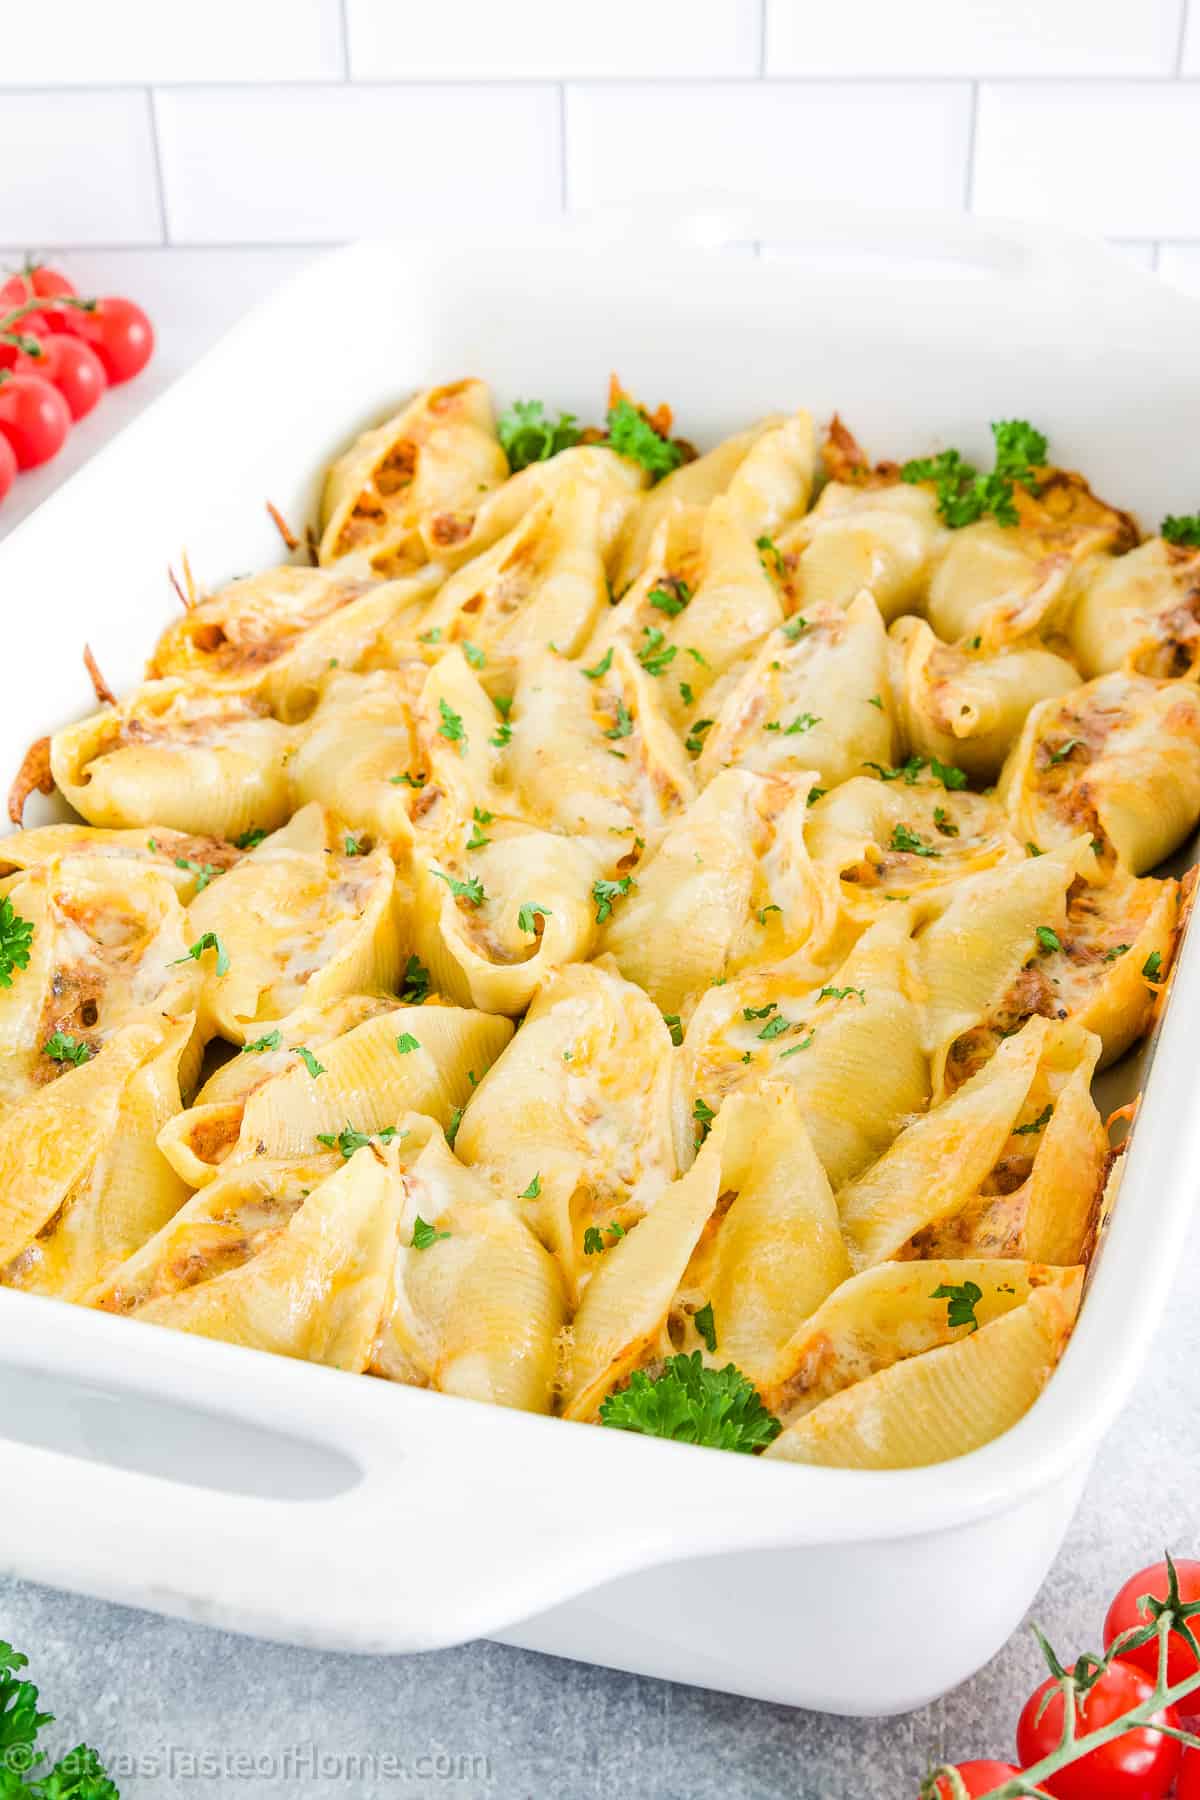 This Stuffed Shells recipe features that perfect stuffing! This delicious dish is made with soft pasta shells filled with a tasty mixture of ground beef, mushrooms, and a variety of cheeses, then baked to perfection in a rich roasted garlic pasta sauce.